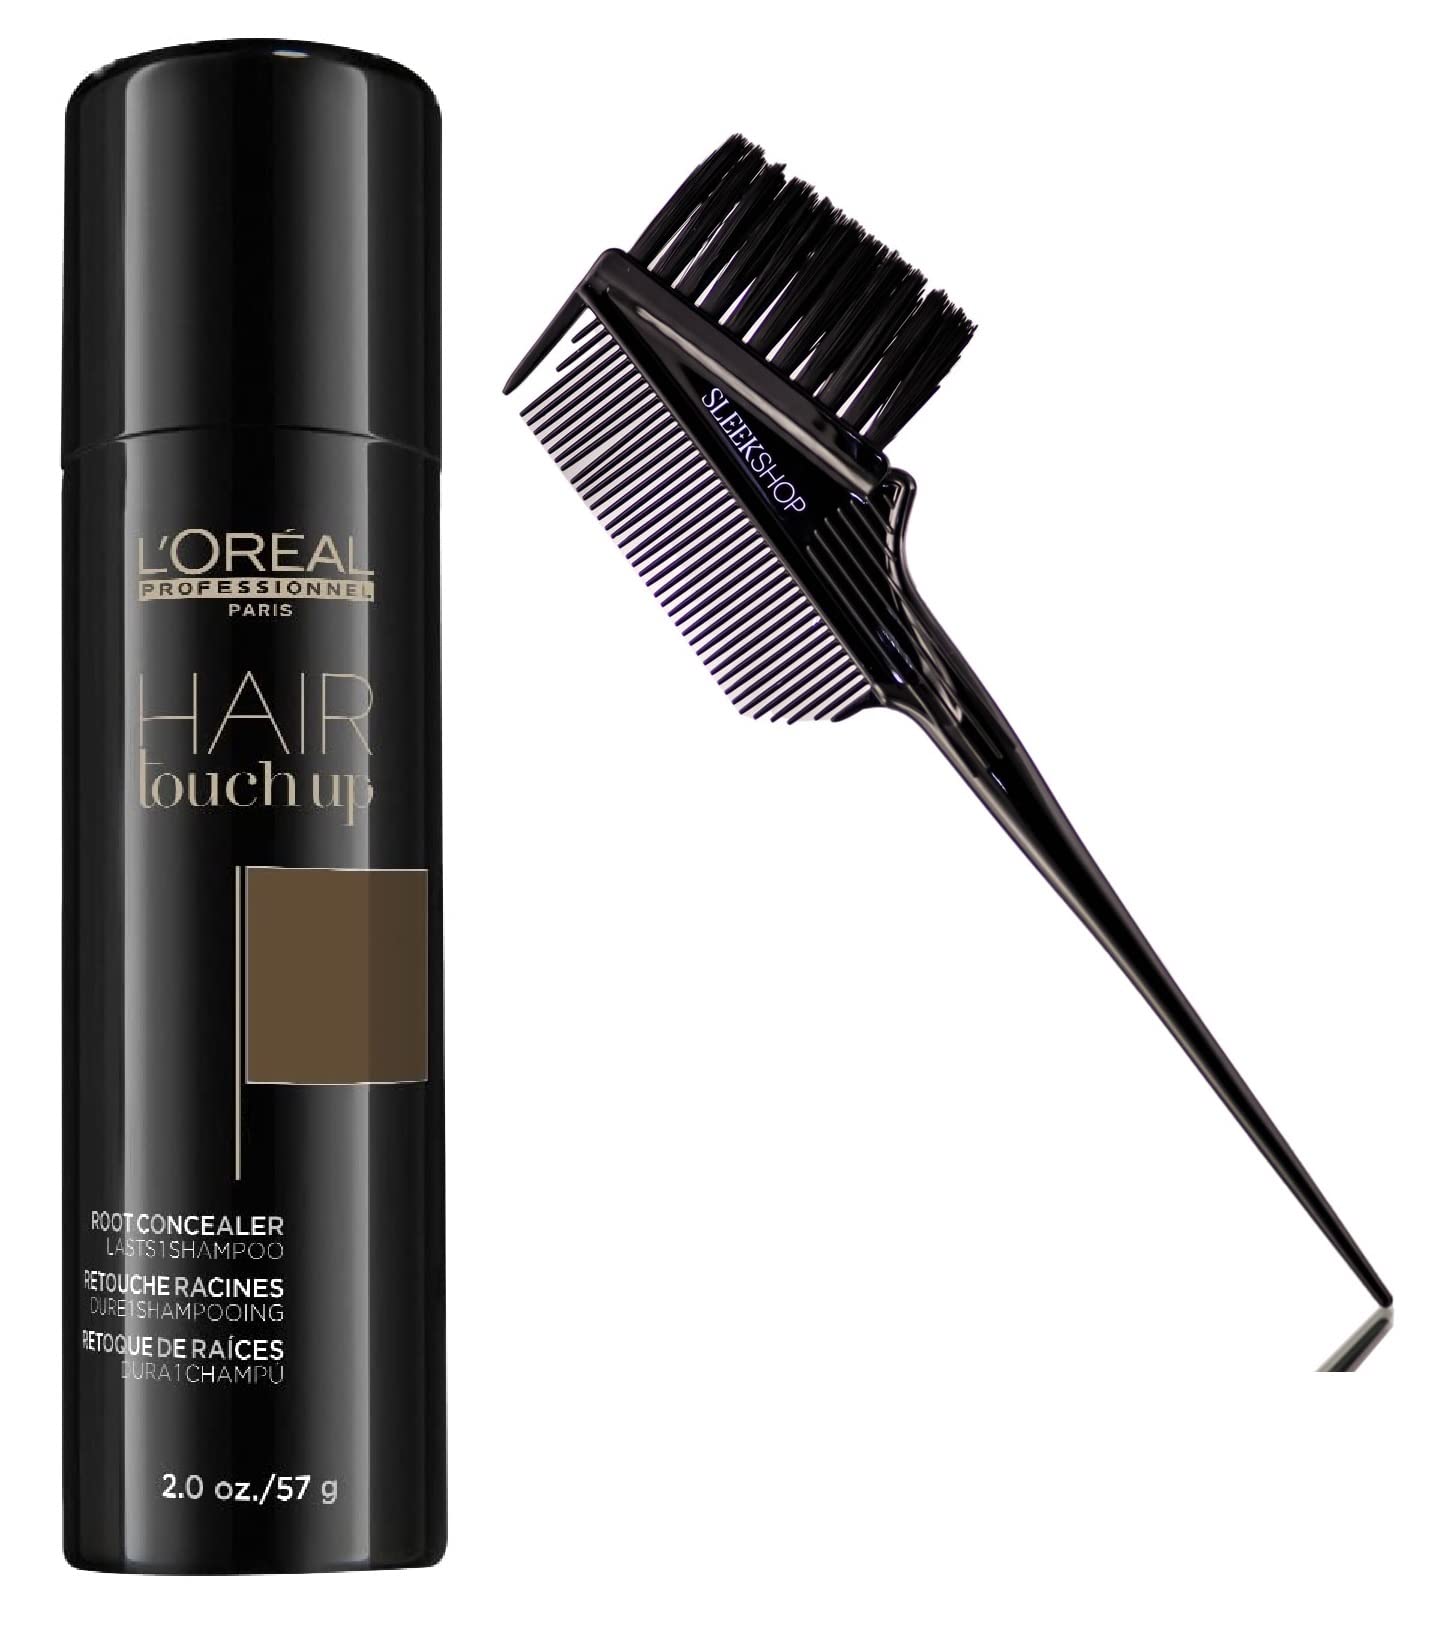 BROWN , L'oreal Professionnel HAIR TOUCH UP Spray, Root Concealer Aerosol Hair Color Hairspray Loreal Haircolor Dye - Pack of 1 w/ SLEEK 3-in-1 Brush/Comb - image 1 of 1